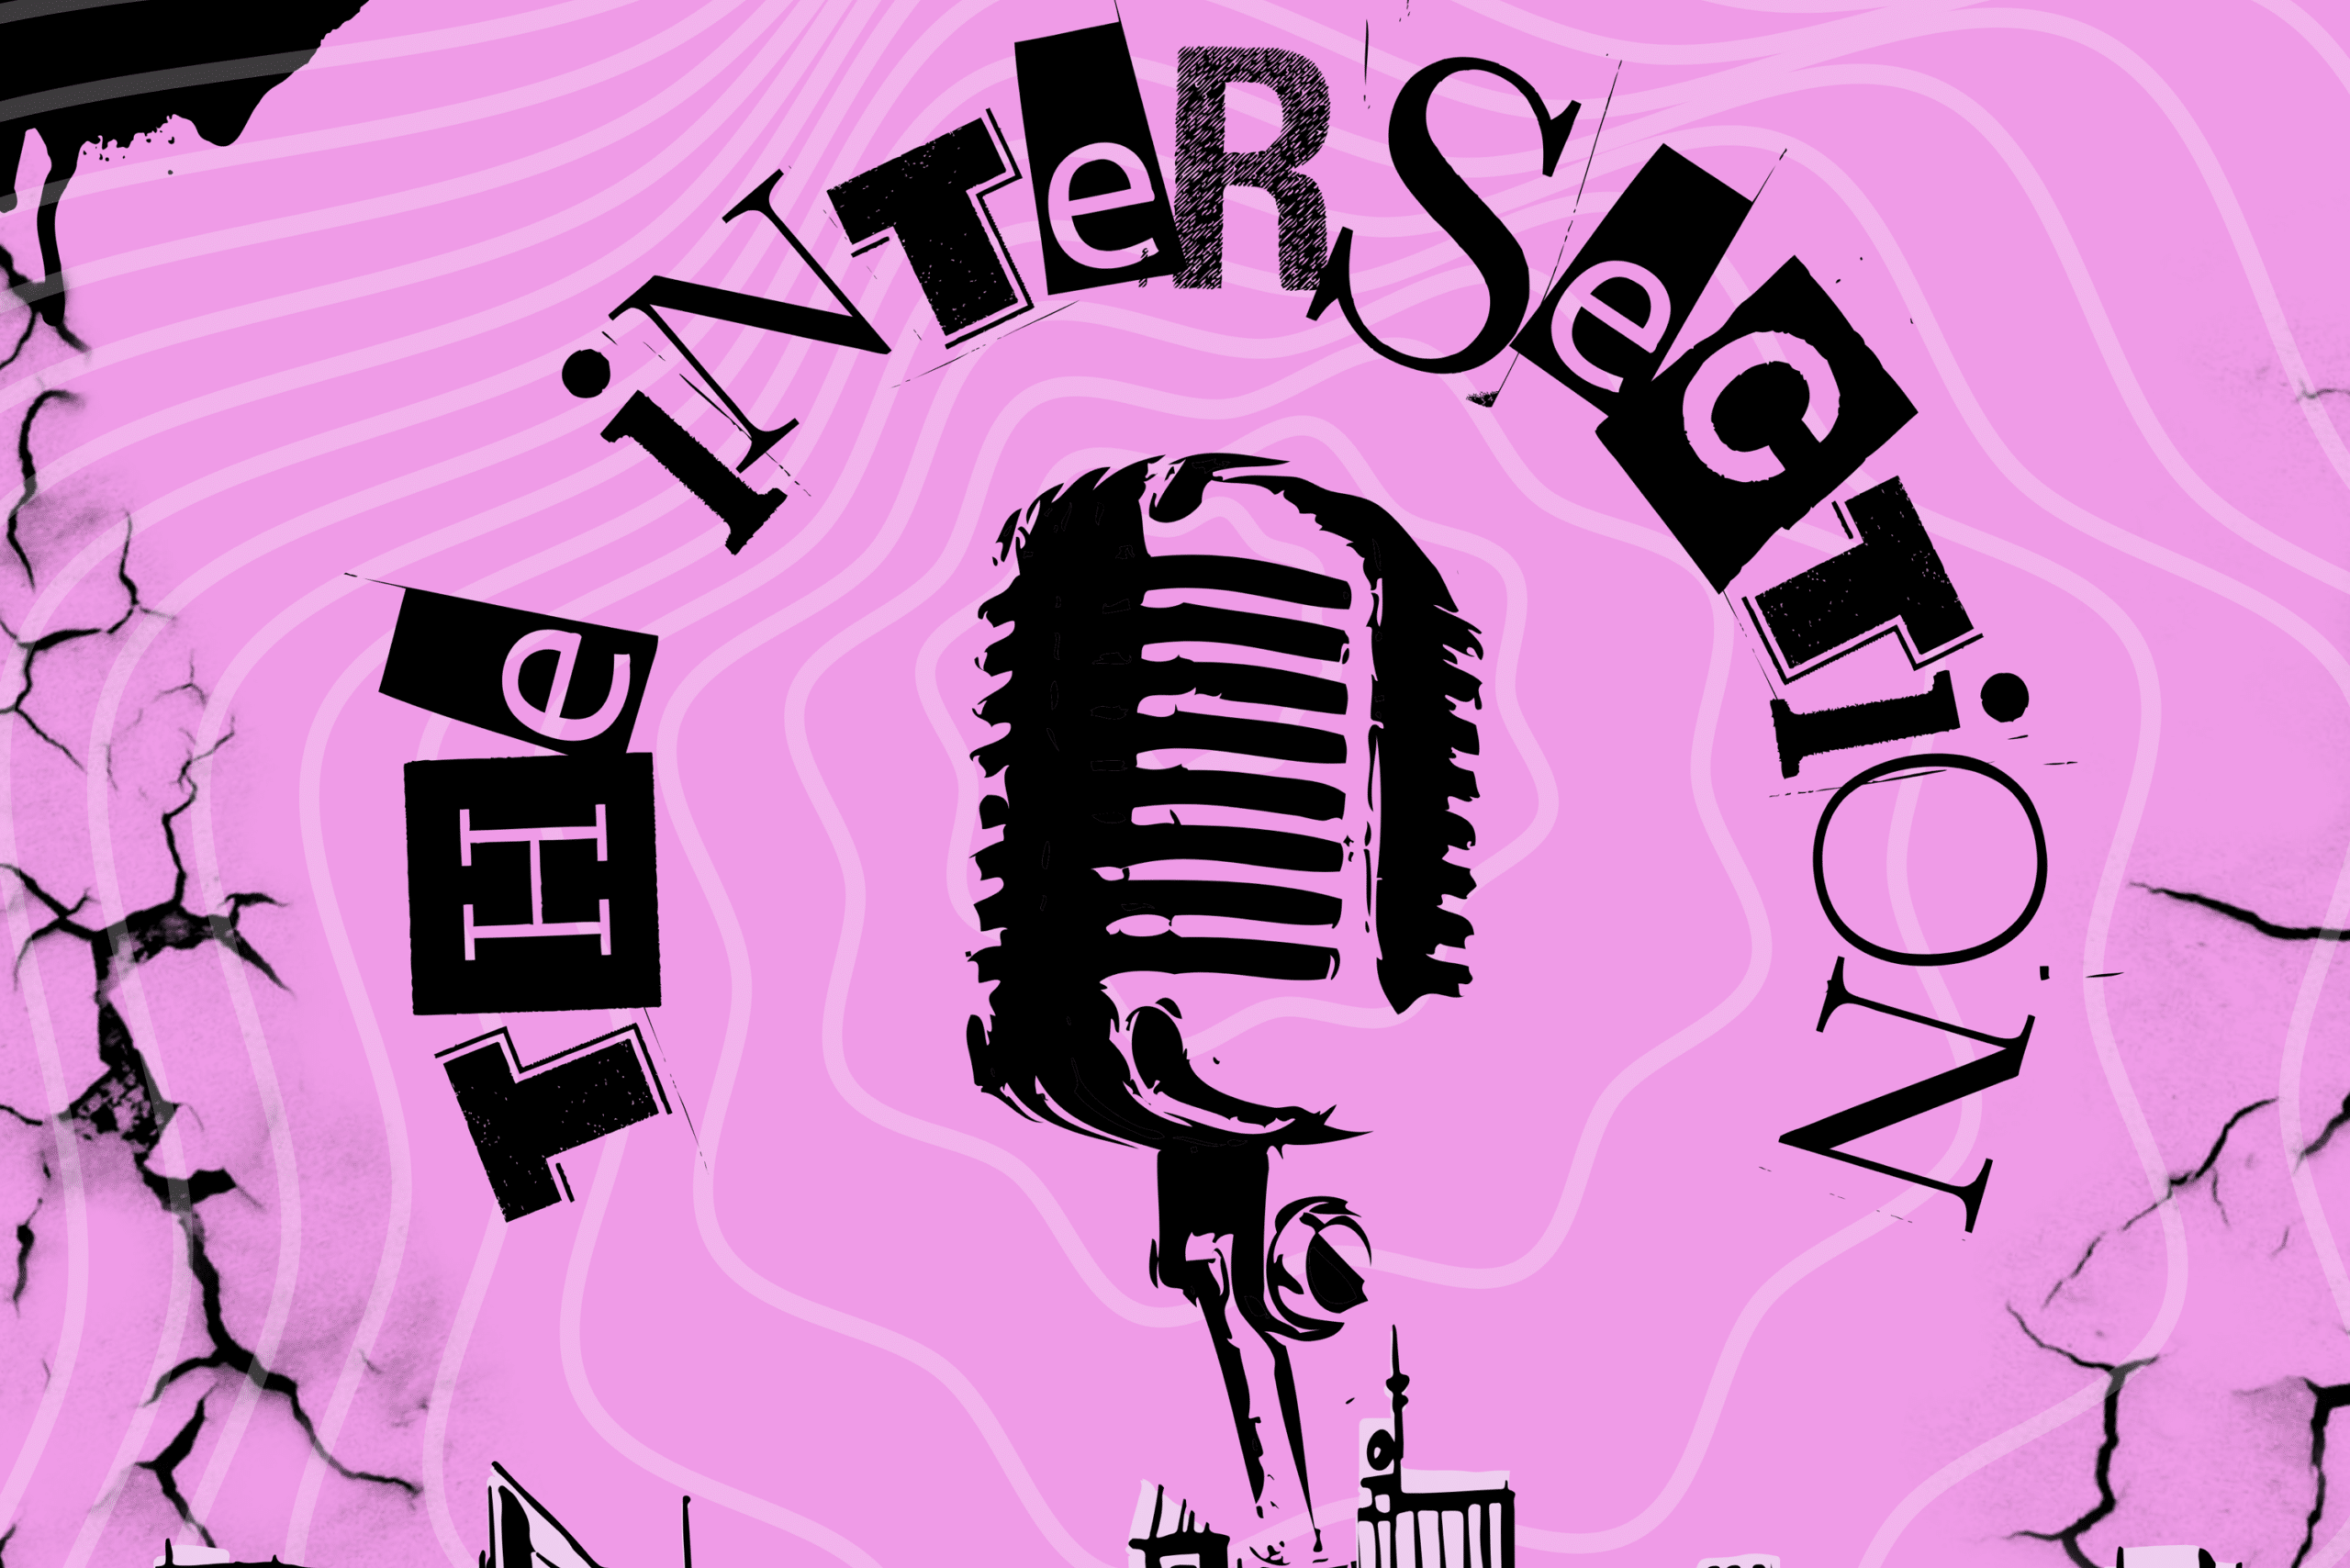 The Intersection show image